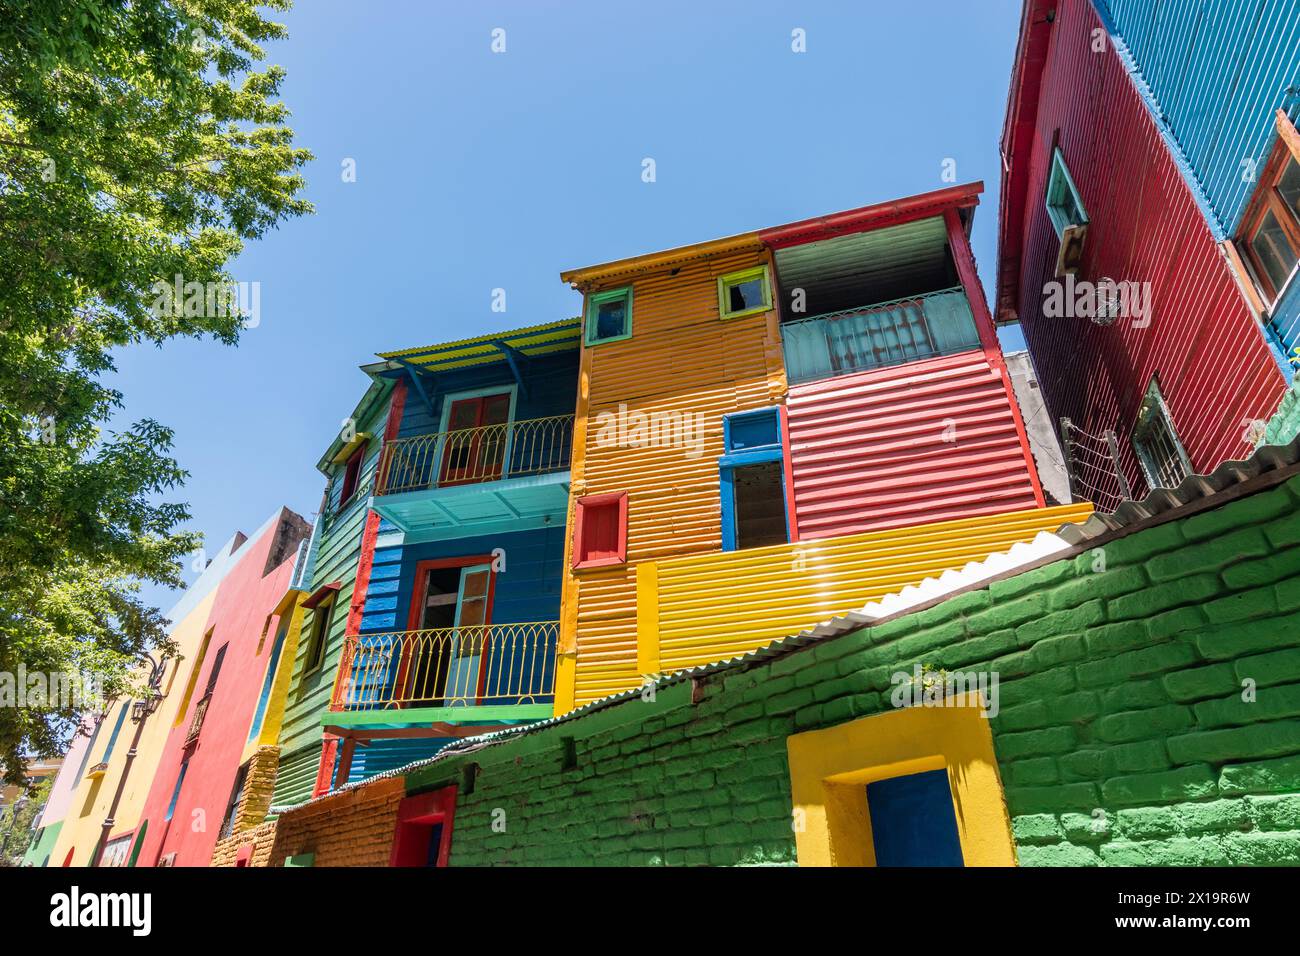 Colorful houses in La Boca district, Buenos Aires, Argentina. Stock Photo